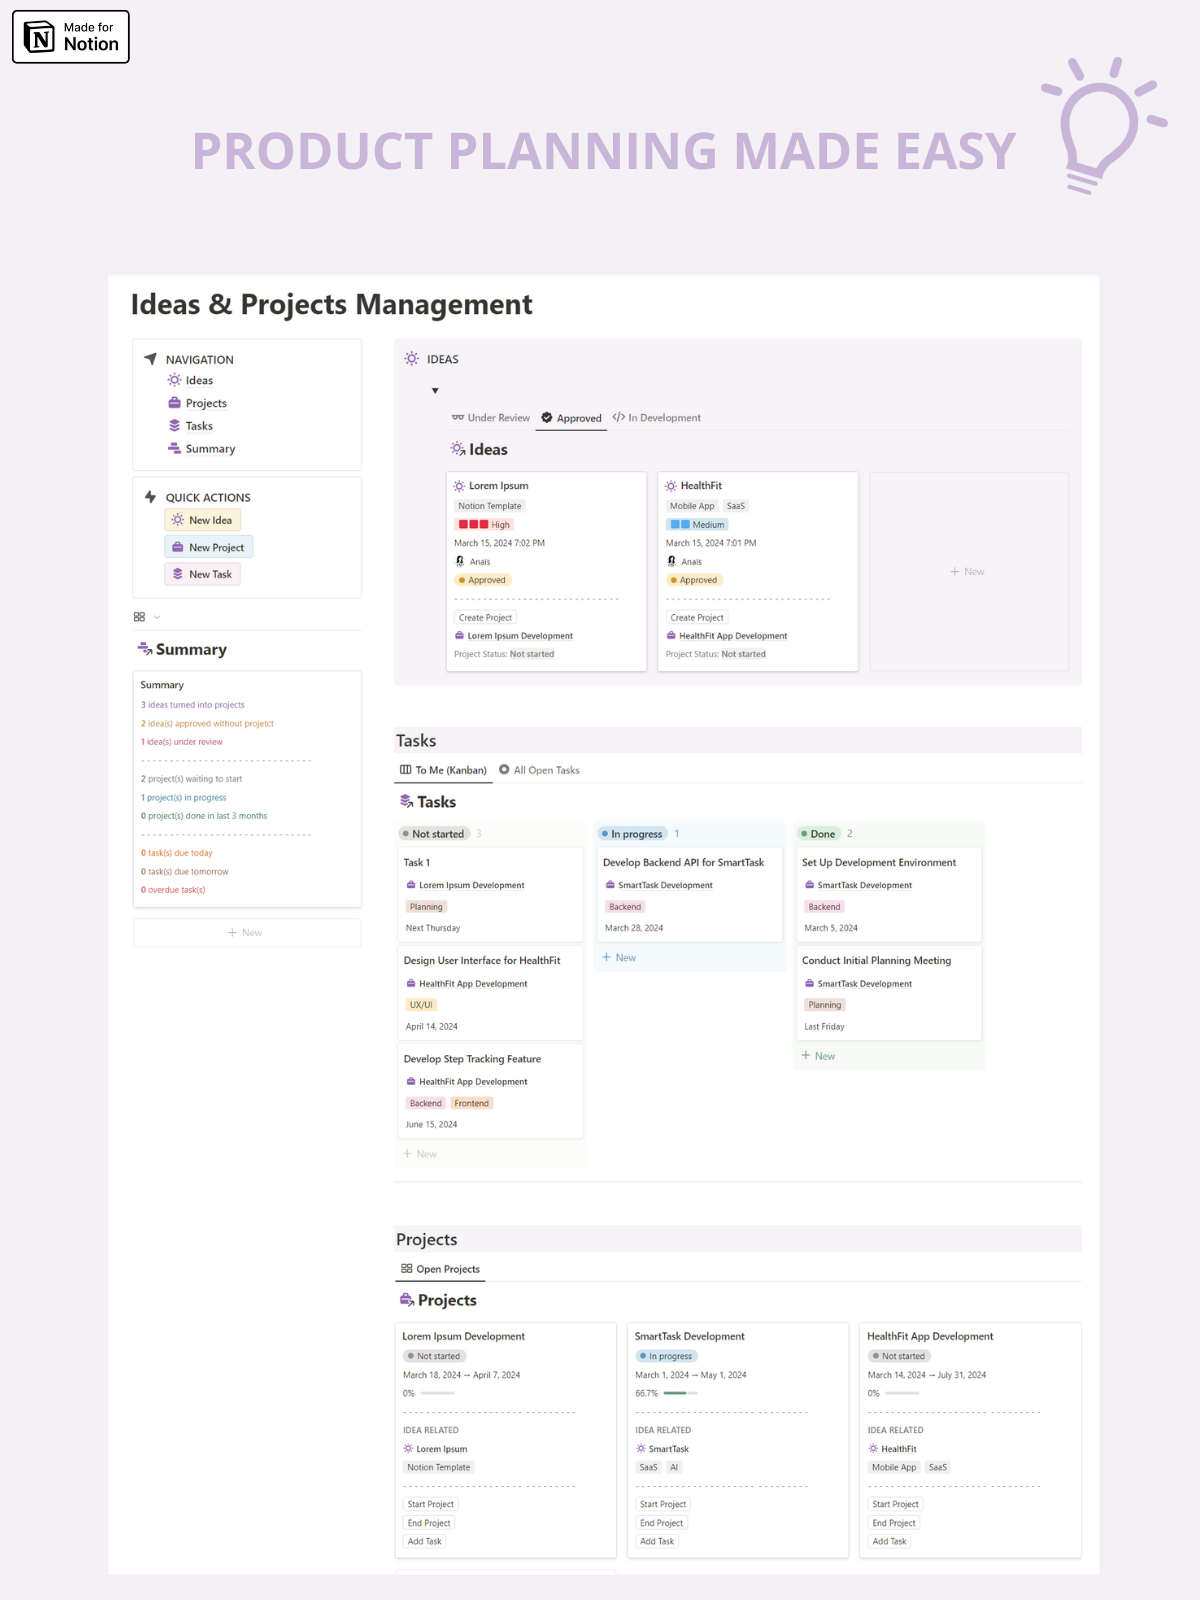 Ideas, Projects and Tasks management (Notion template)